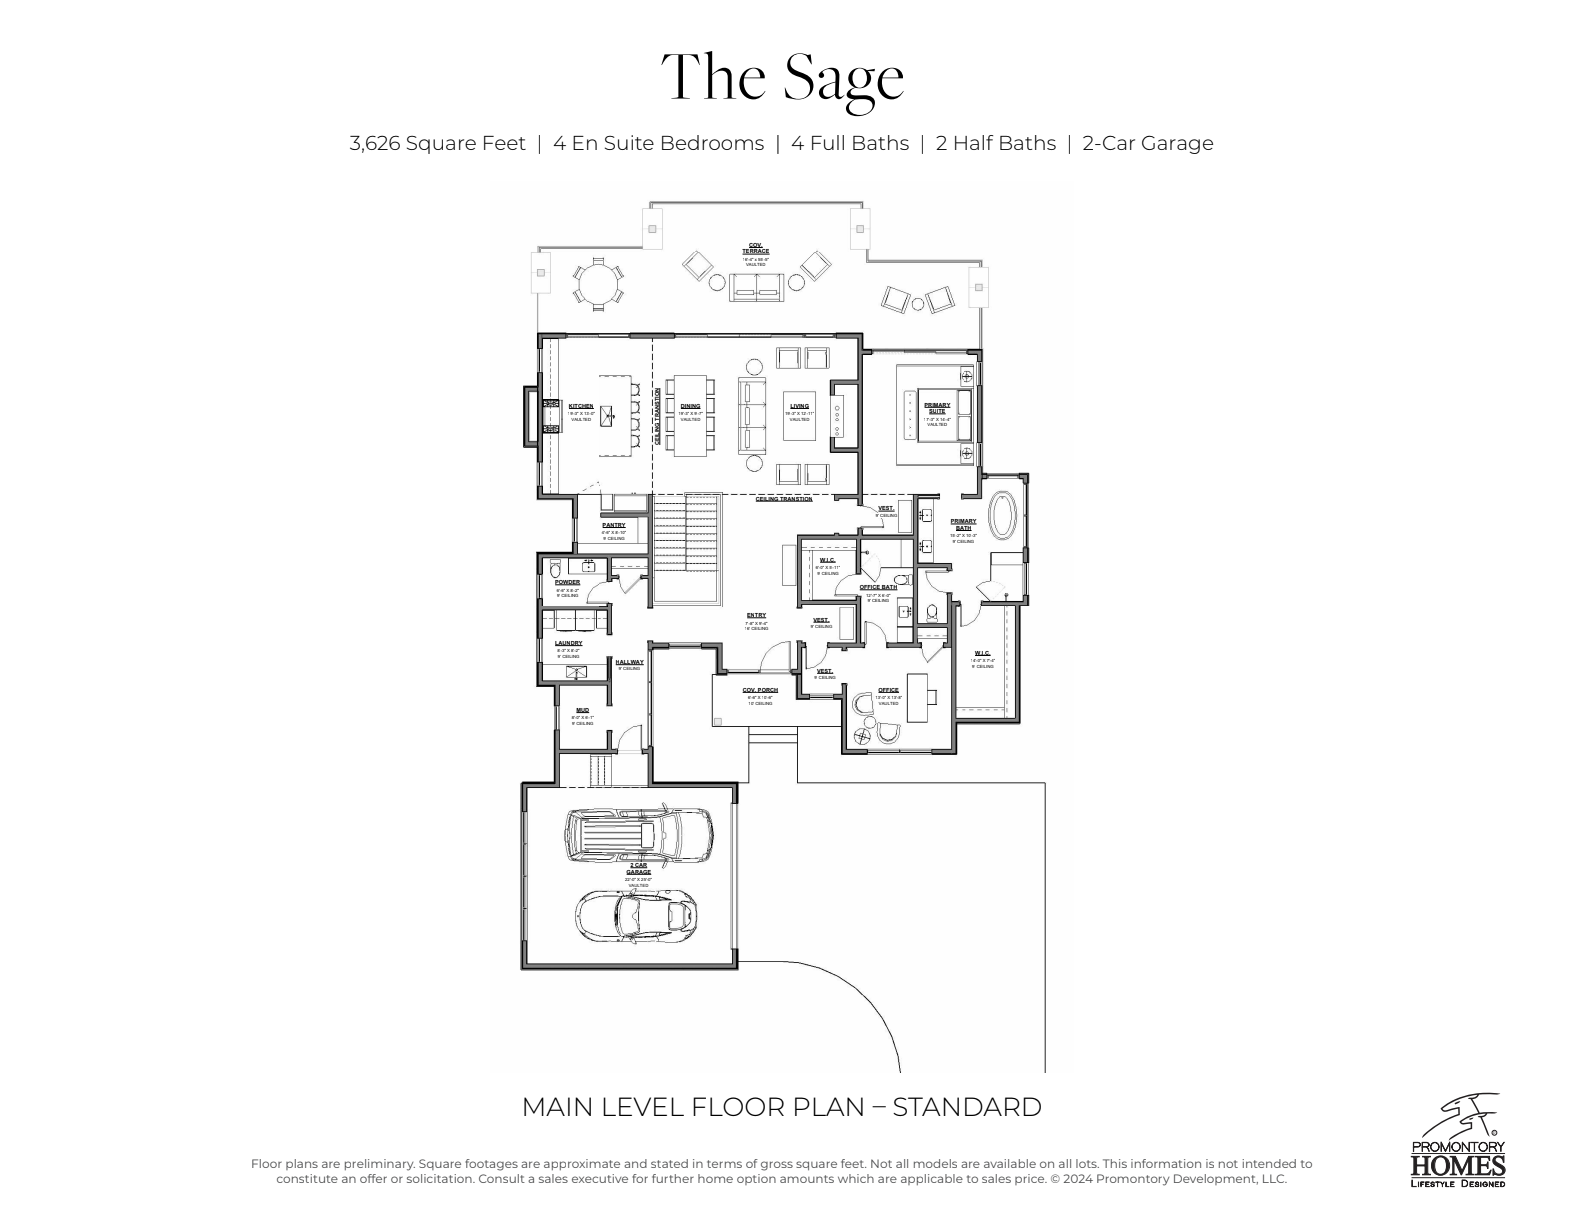 Promontory homes - The Sage